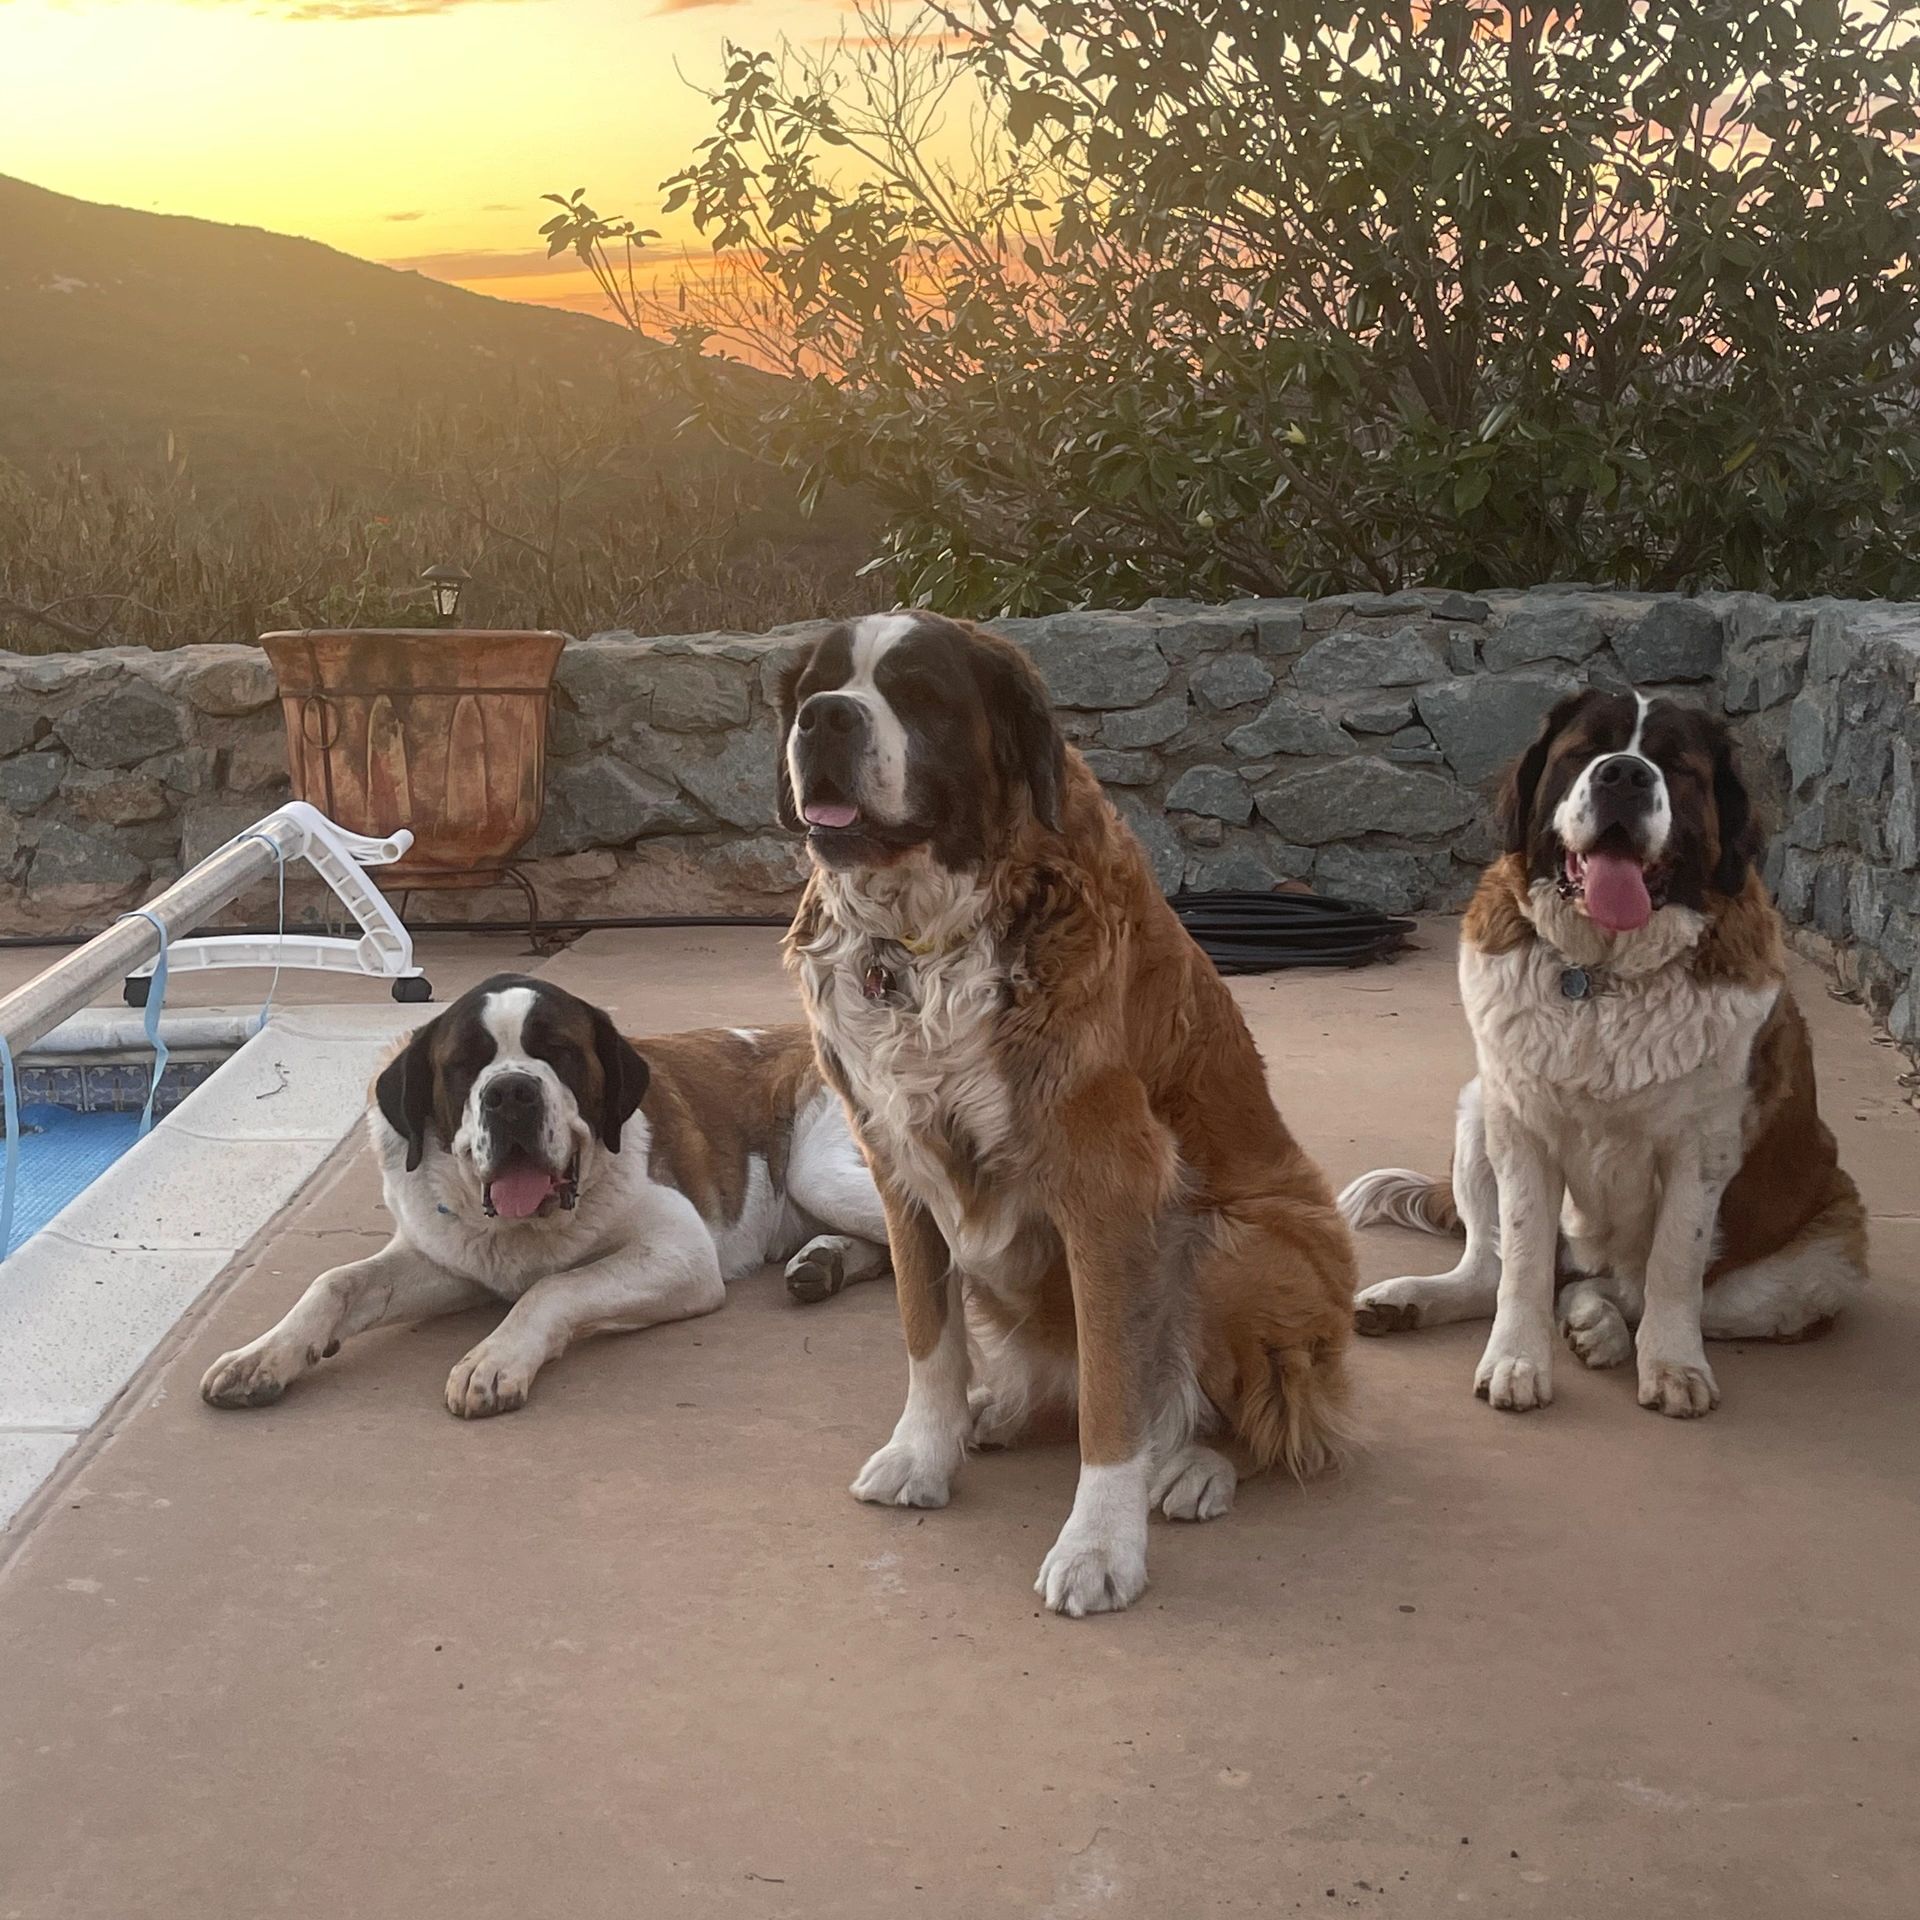 Our pack of gentle giants is ready to assist you!